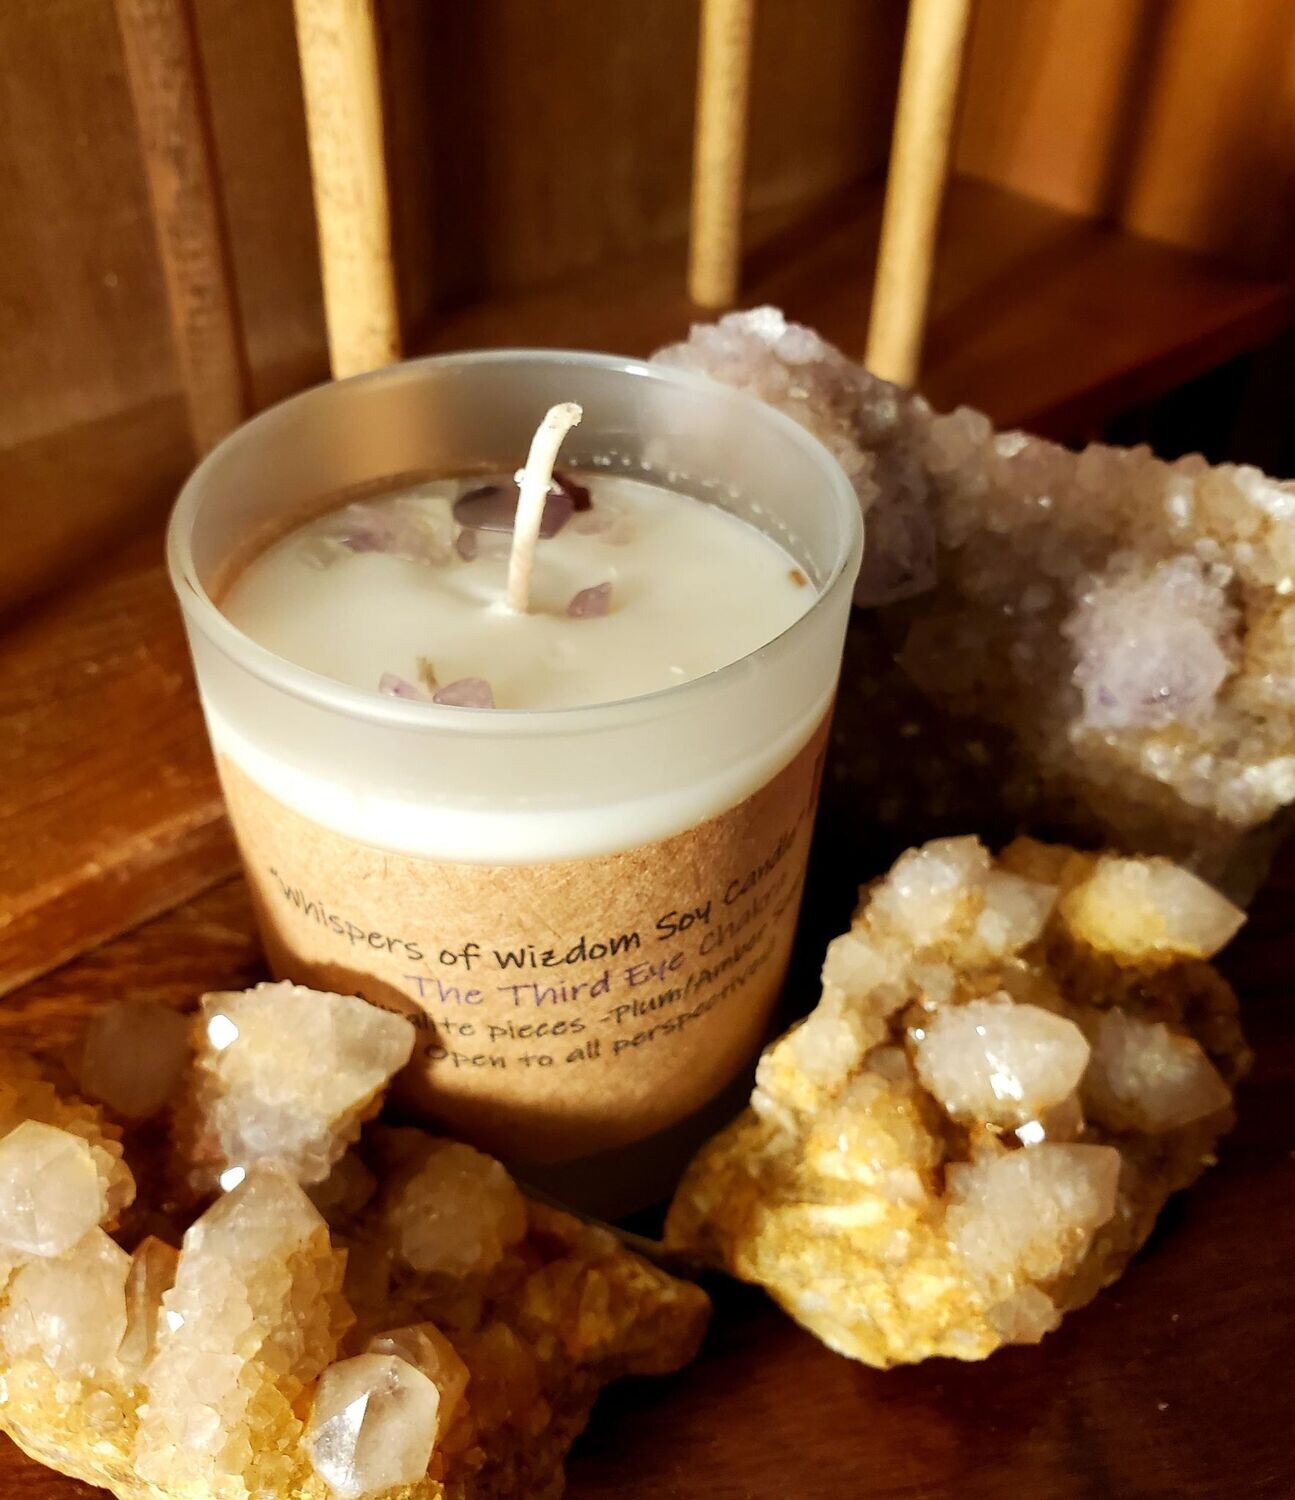 Judy's Soy Candle -Third Eye Chakra- with Amber/Plum & Auralite